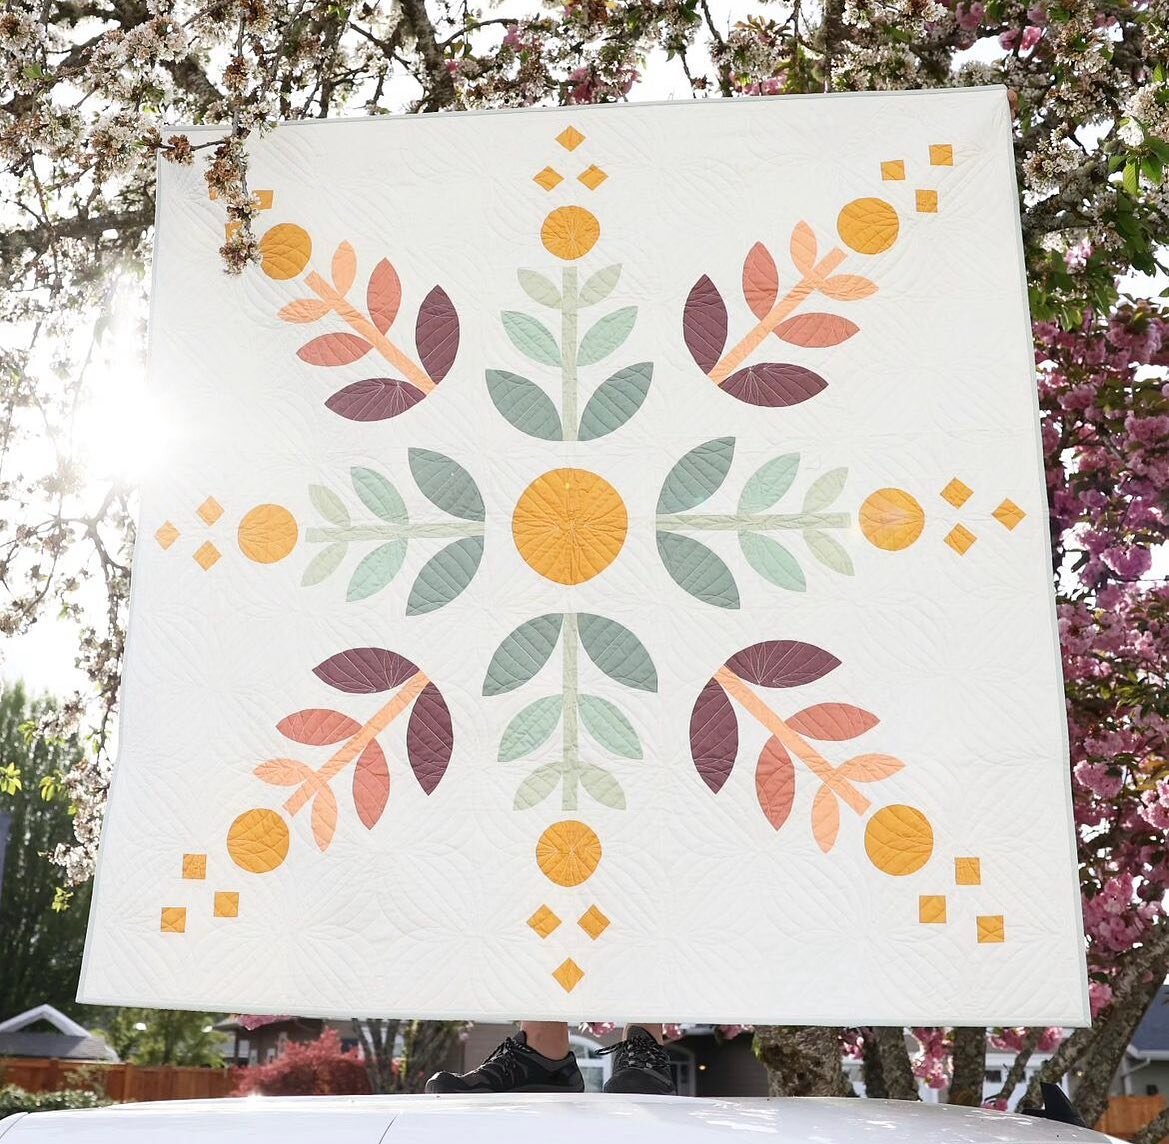 Have you seen the #FlorallyQuilt by @heck.yes.sewco?? The pattern was released TODAY, and I have to tell you&hellip;. Not only is this design so stunning it made me gasp when I first saw it, but I also did a review of the pattern and it is just *incr